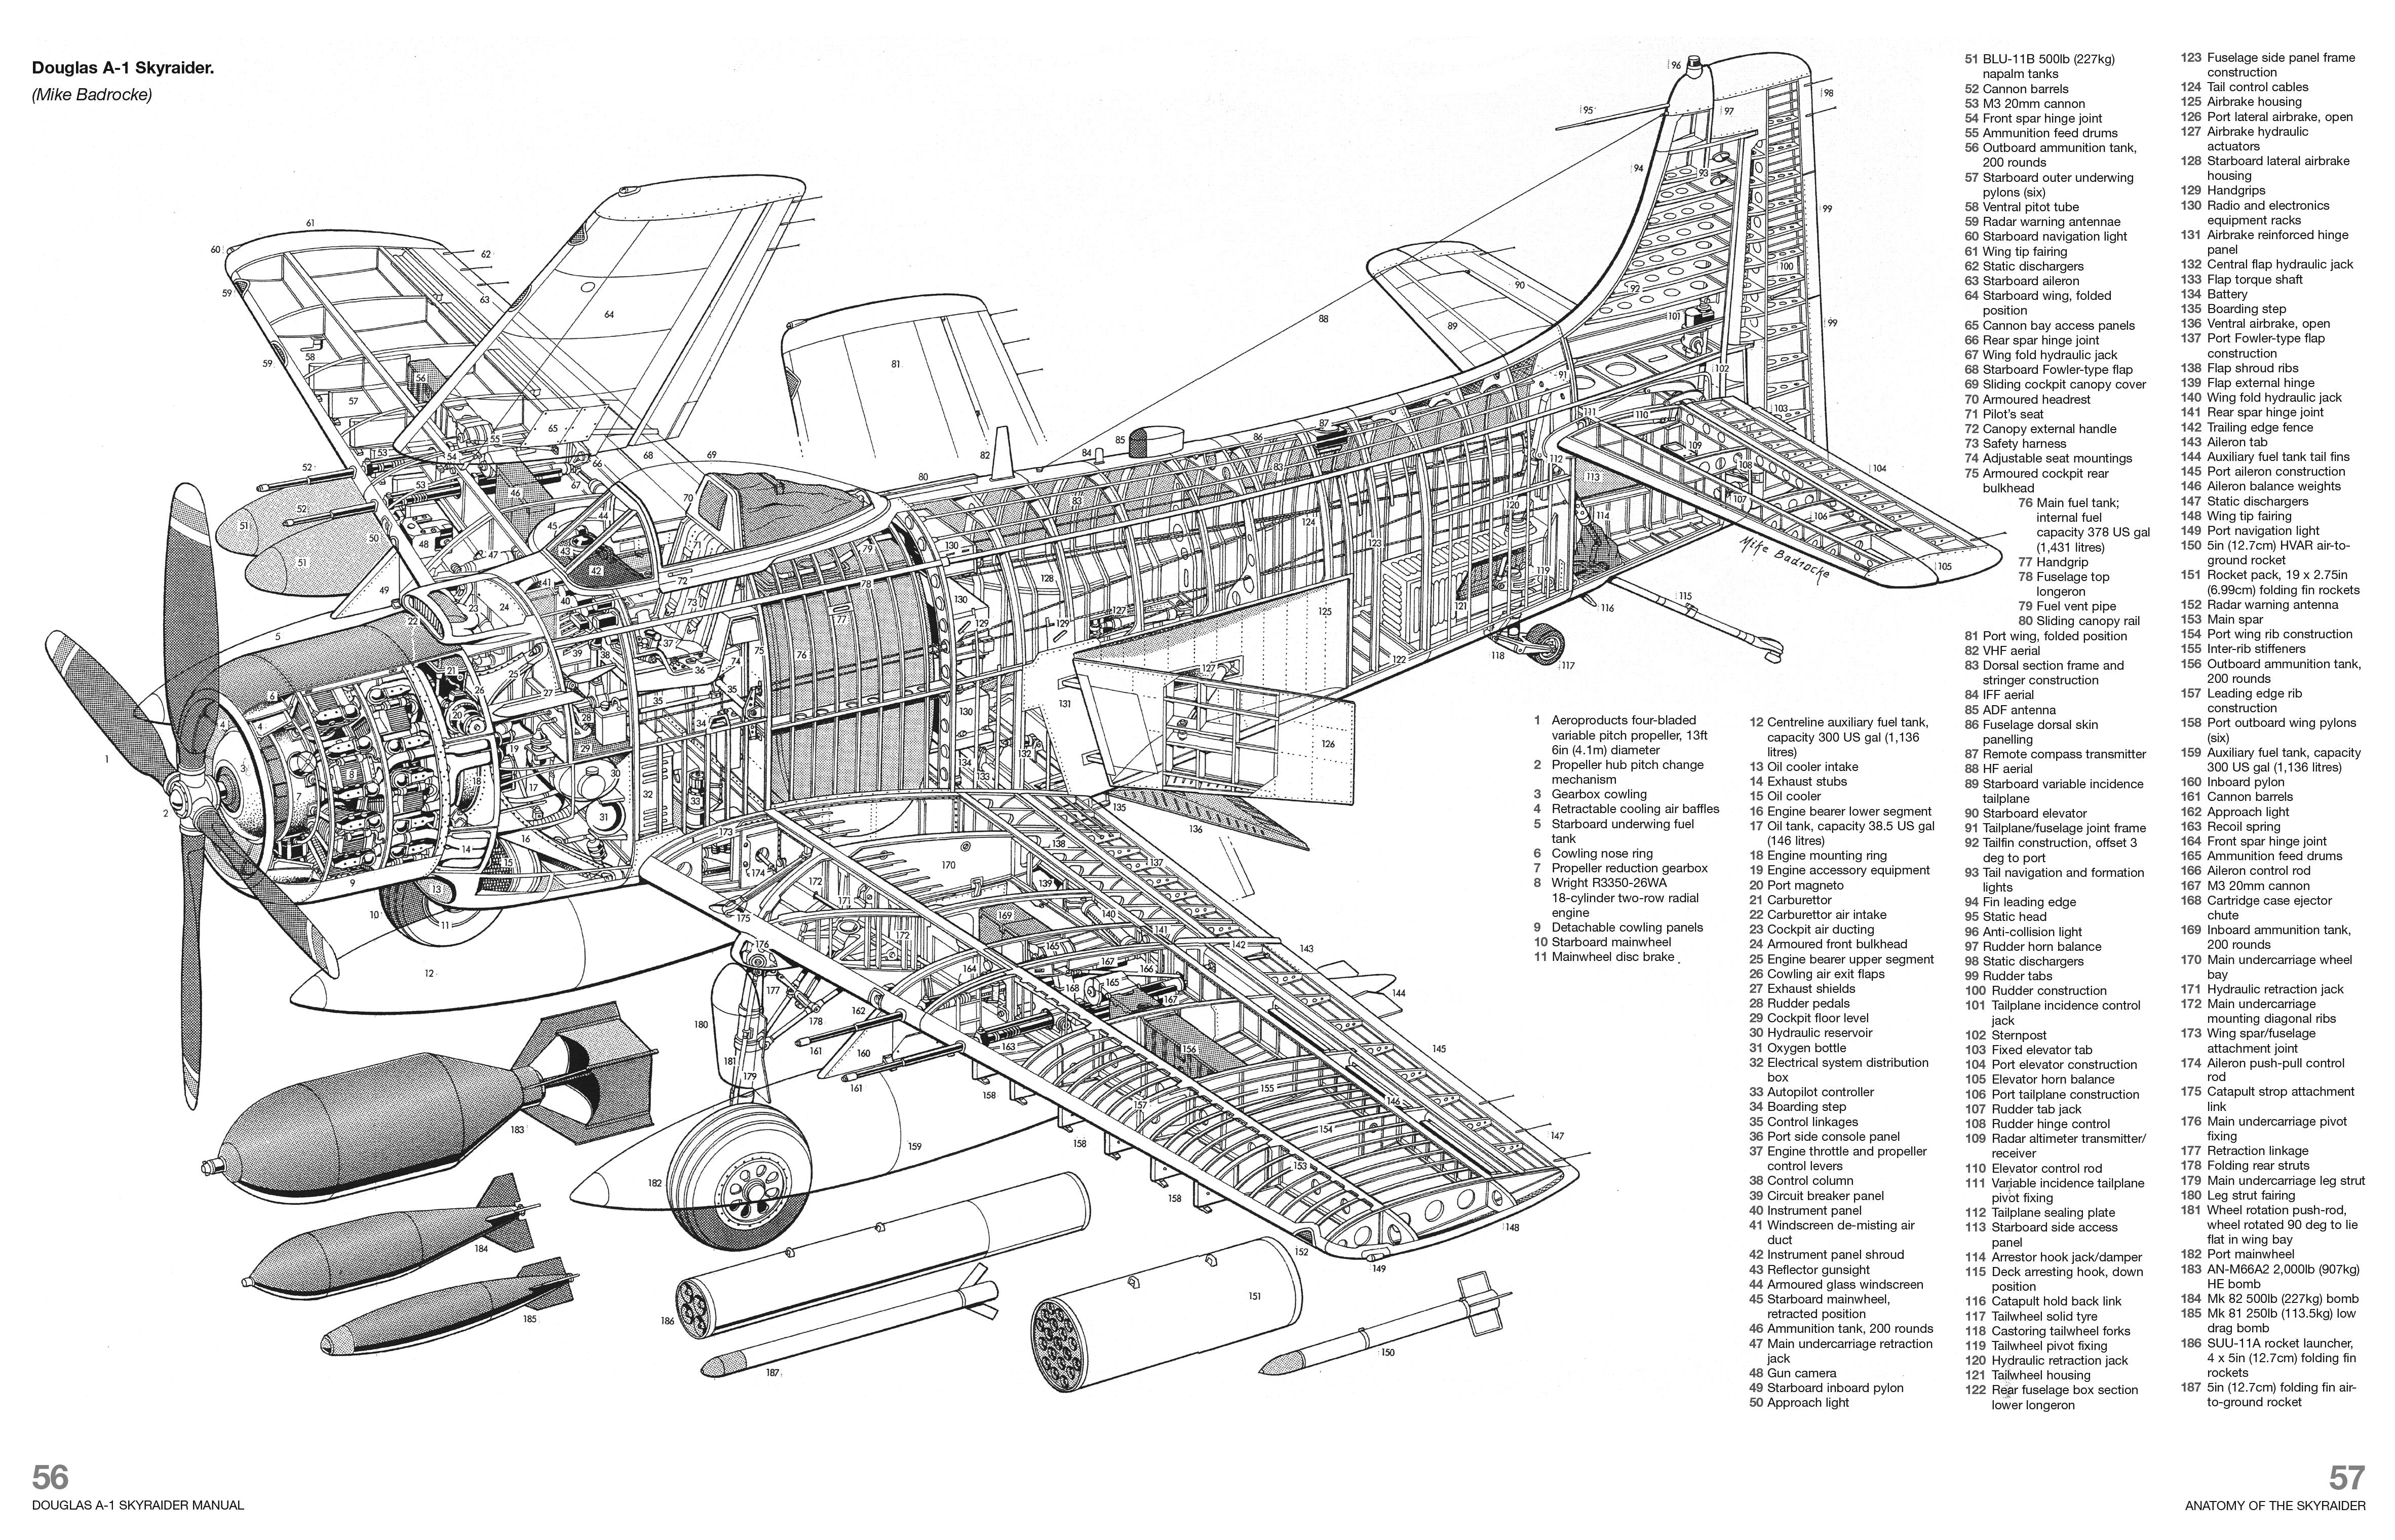 Airplane Drawing Cross Section Blueprints Douglas A 1 Skyraider 4728x3040